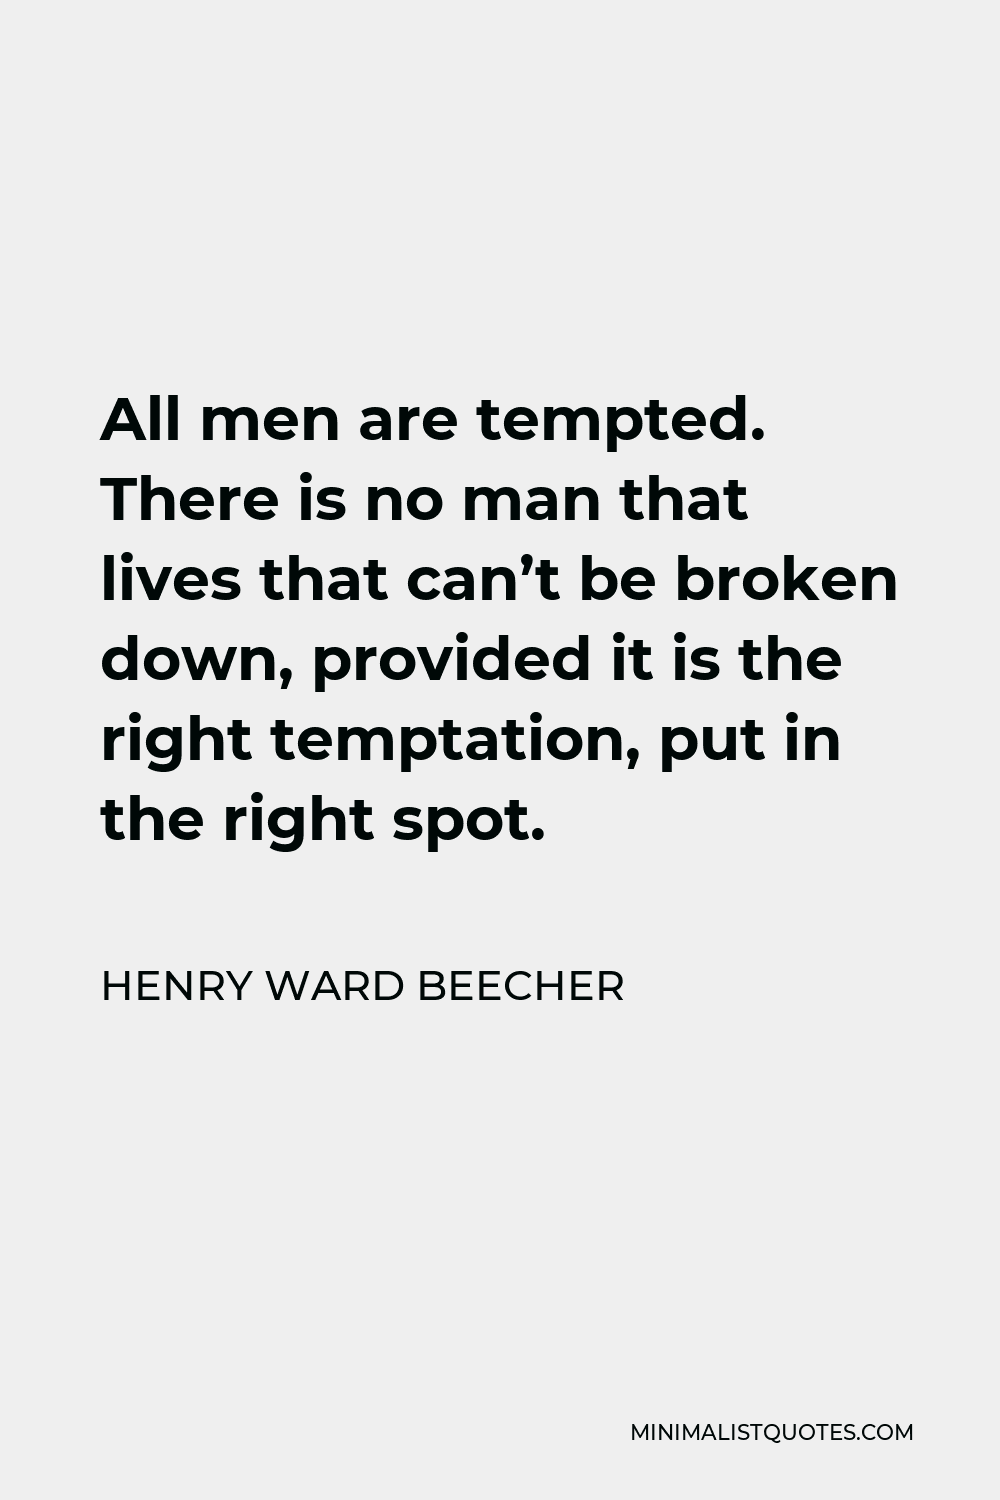 Henry Ward Beecher Quote - All men are tempted. There is no man that lives that can’t be broken down, provided it is the right temptation, put in the right spot.